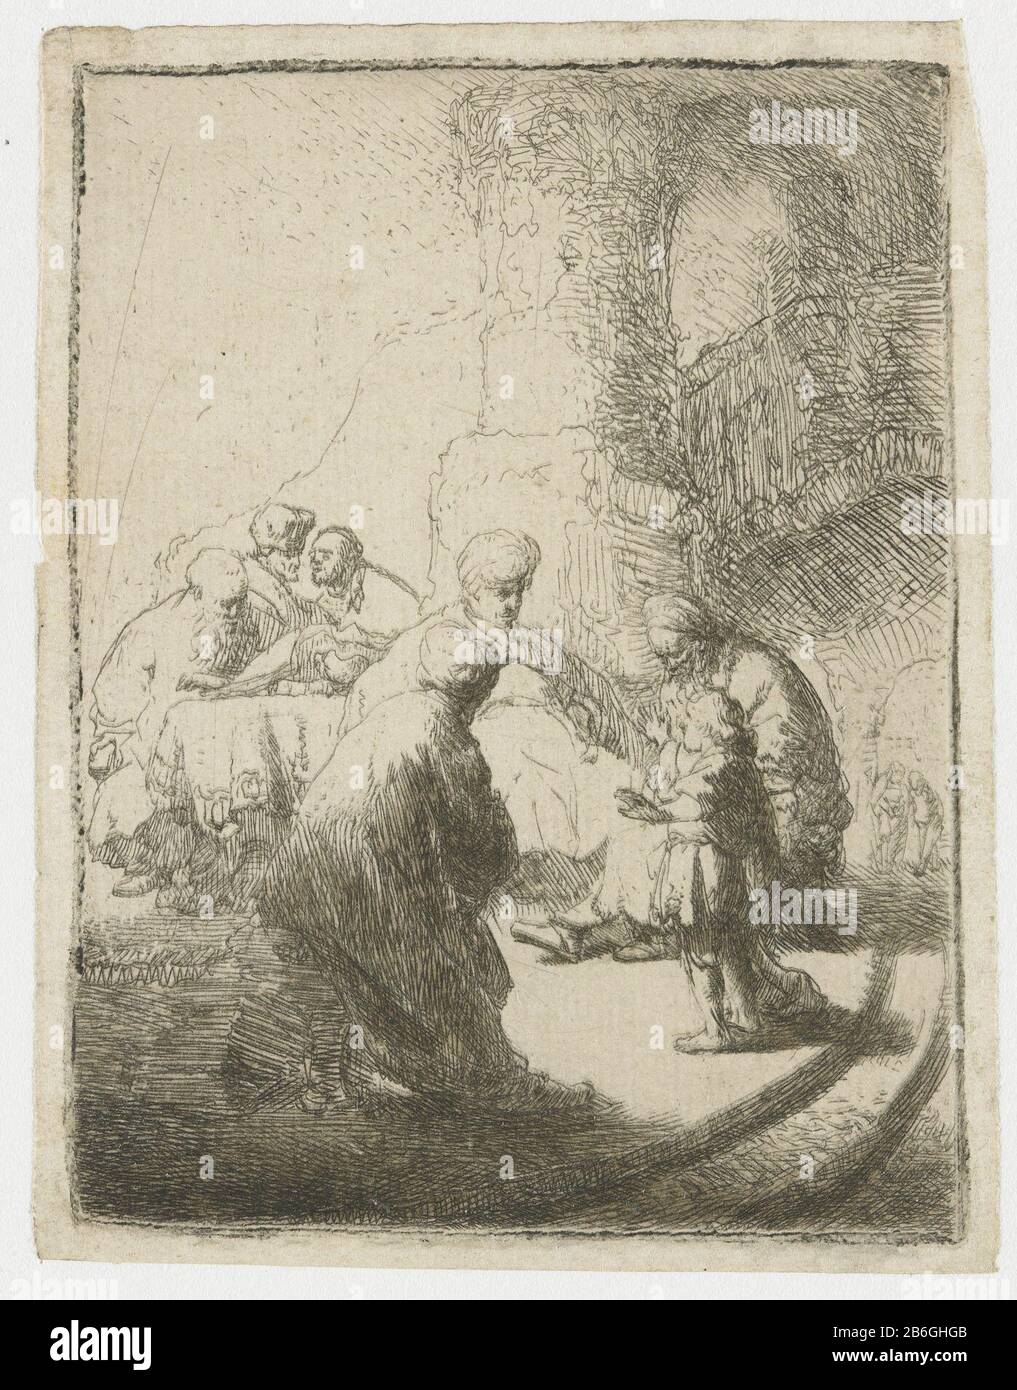 Christ and the scribes small plate RP-P-1961-1021 Christ and the scribes: small plate object type: picture Item number: RP-P-1961-1021Catalogusreferentie: New Hollstein Dutch 53-3 (7) Bartsch 66-3 (3) Hollstein Dutch 66-3 (3) Labeling / brand: brand, verso right: Lugt 2228opschrift, verso bottom right, pencil: 'C. 11946 '(Colnaghi number) Manufacture Vervaardiger: print maker: Rembrandt van Rijn To own design of Rembrandt van Rijn Date: 1630 Physical characteristics: etching material: paper Technique: etching dimensions: h 89 mm × b 68 mm Subject: Christ explaining his doctrine Stock Photo